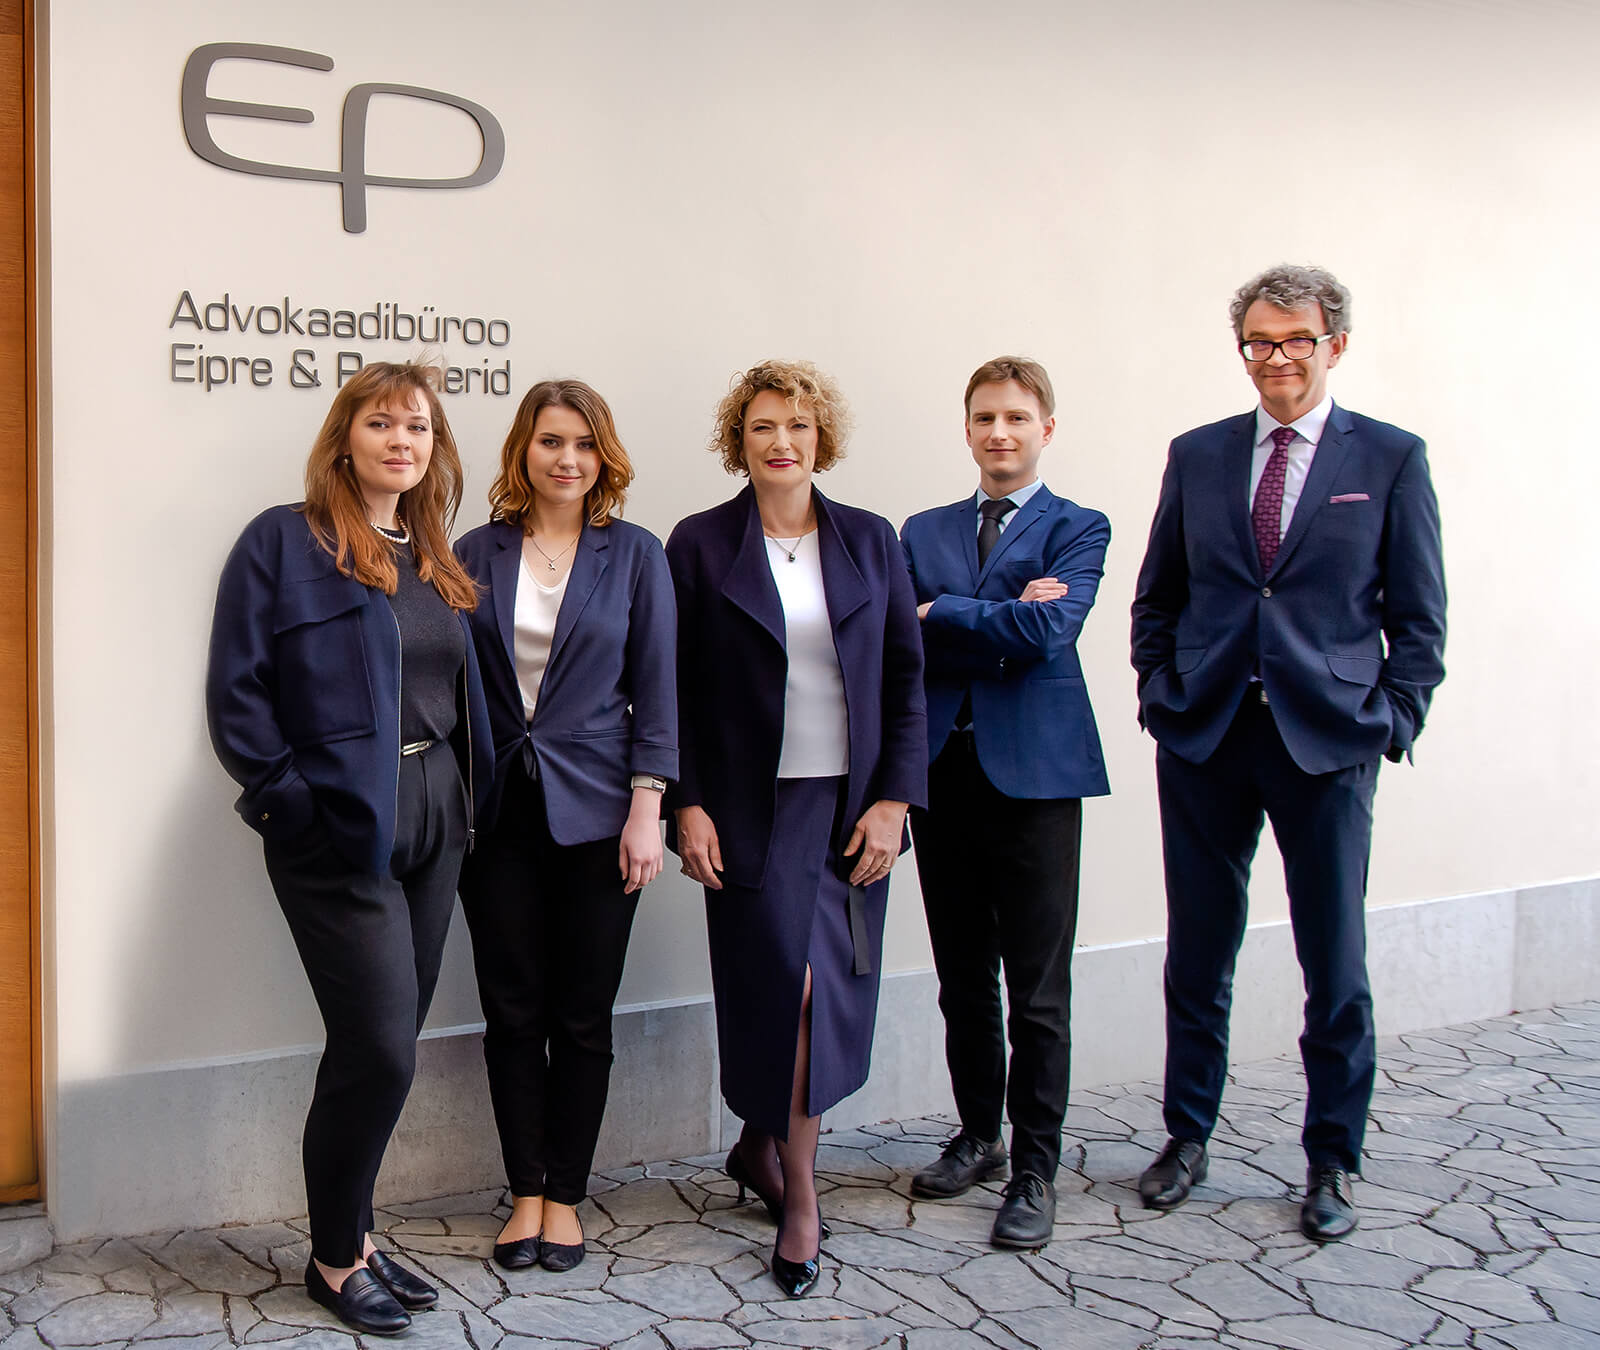 The Eipre & Partners Law Firm